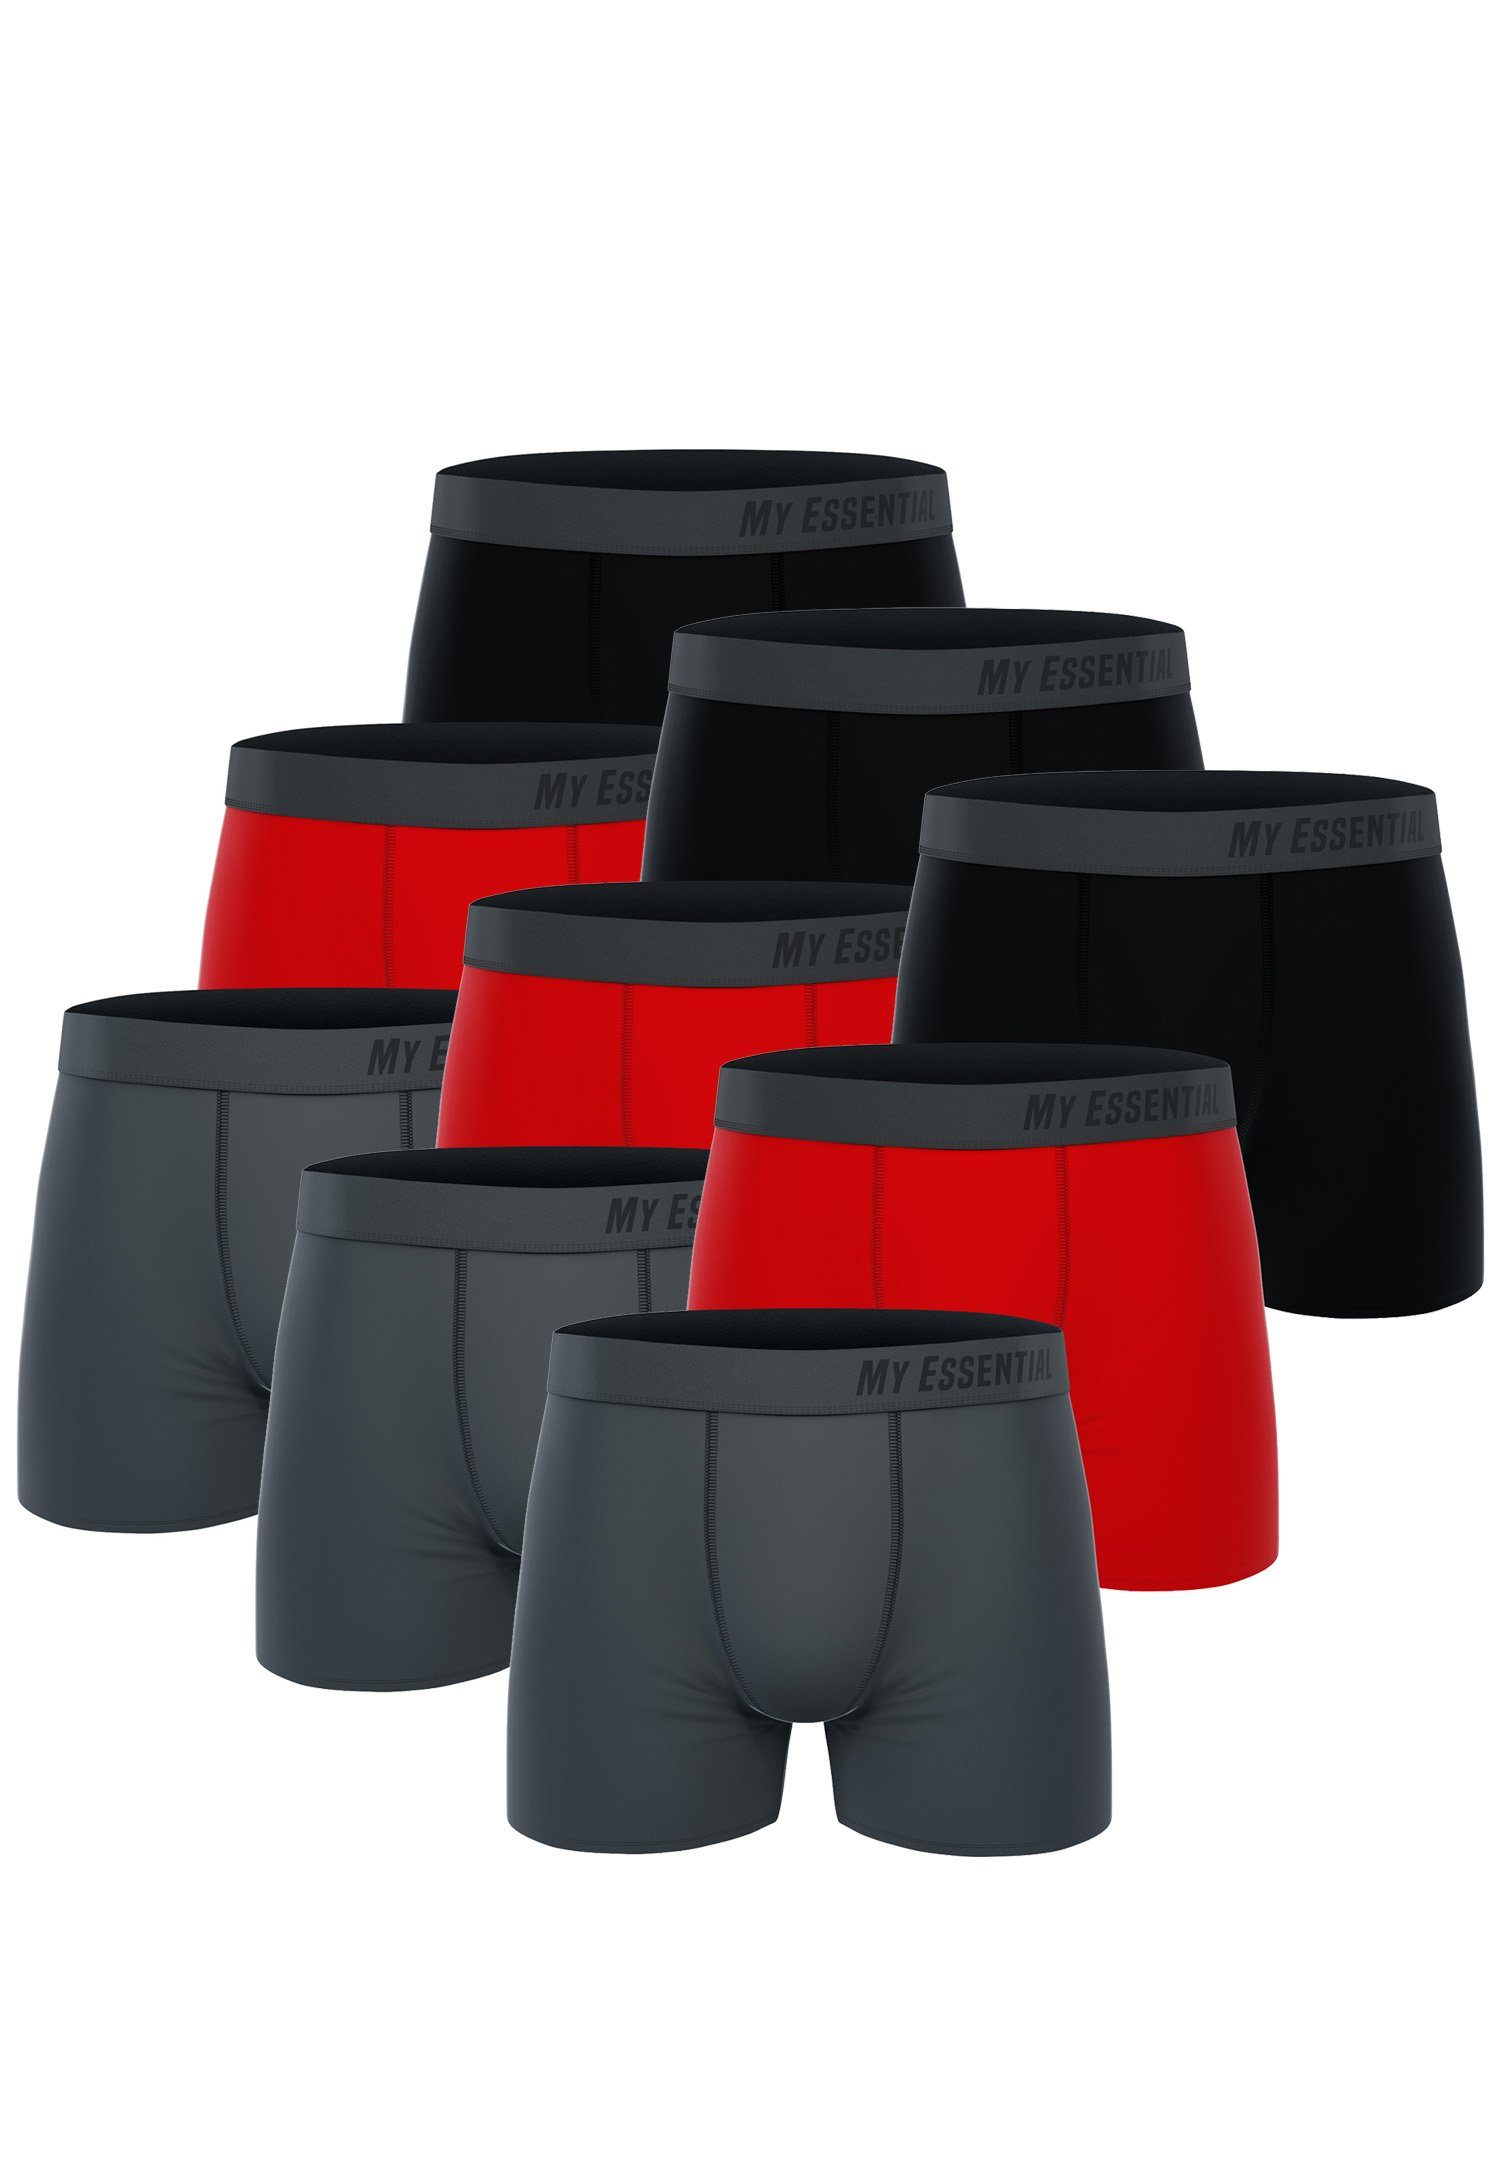 My Essential Clothing Boxershorts My Essential 9 Pack Boxers Cotton Bio (Spar-Pack, 9-St., 9er-Pack) Red